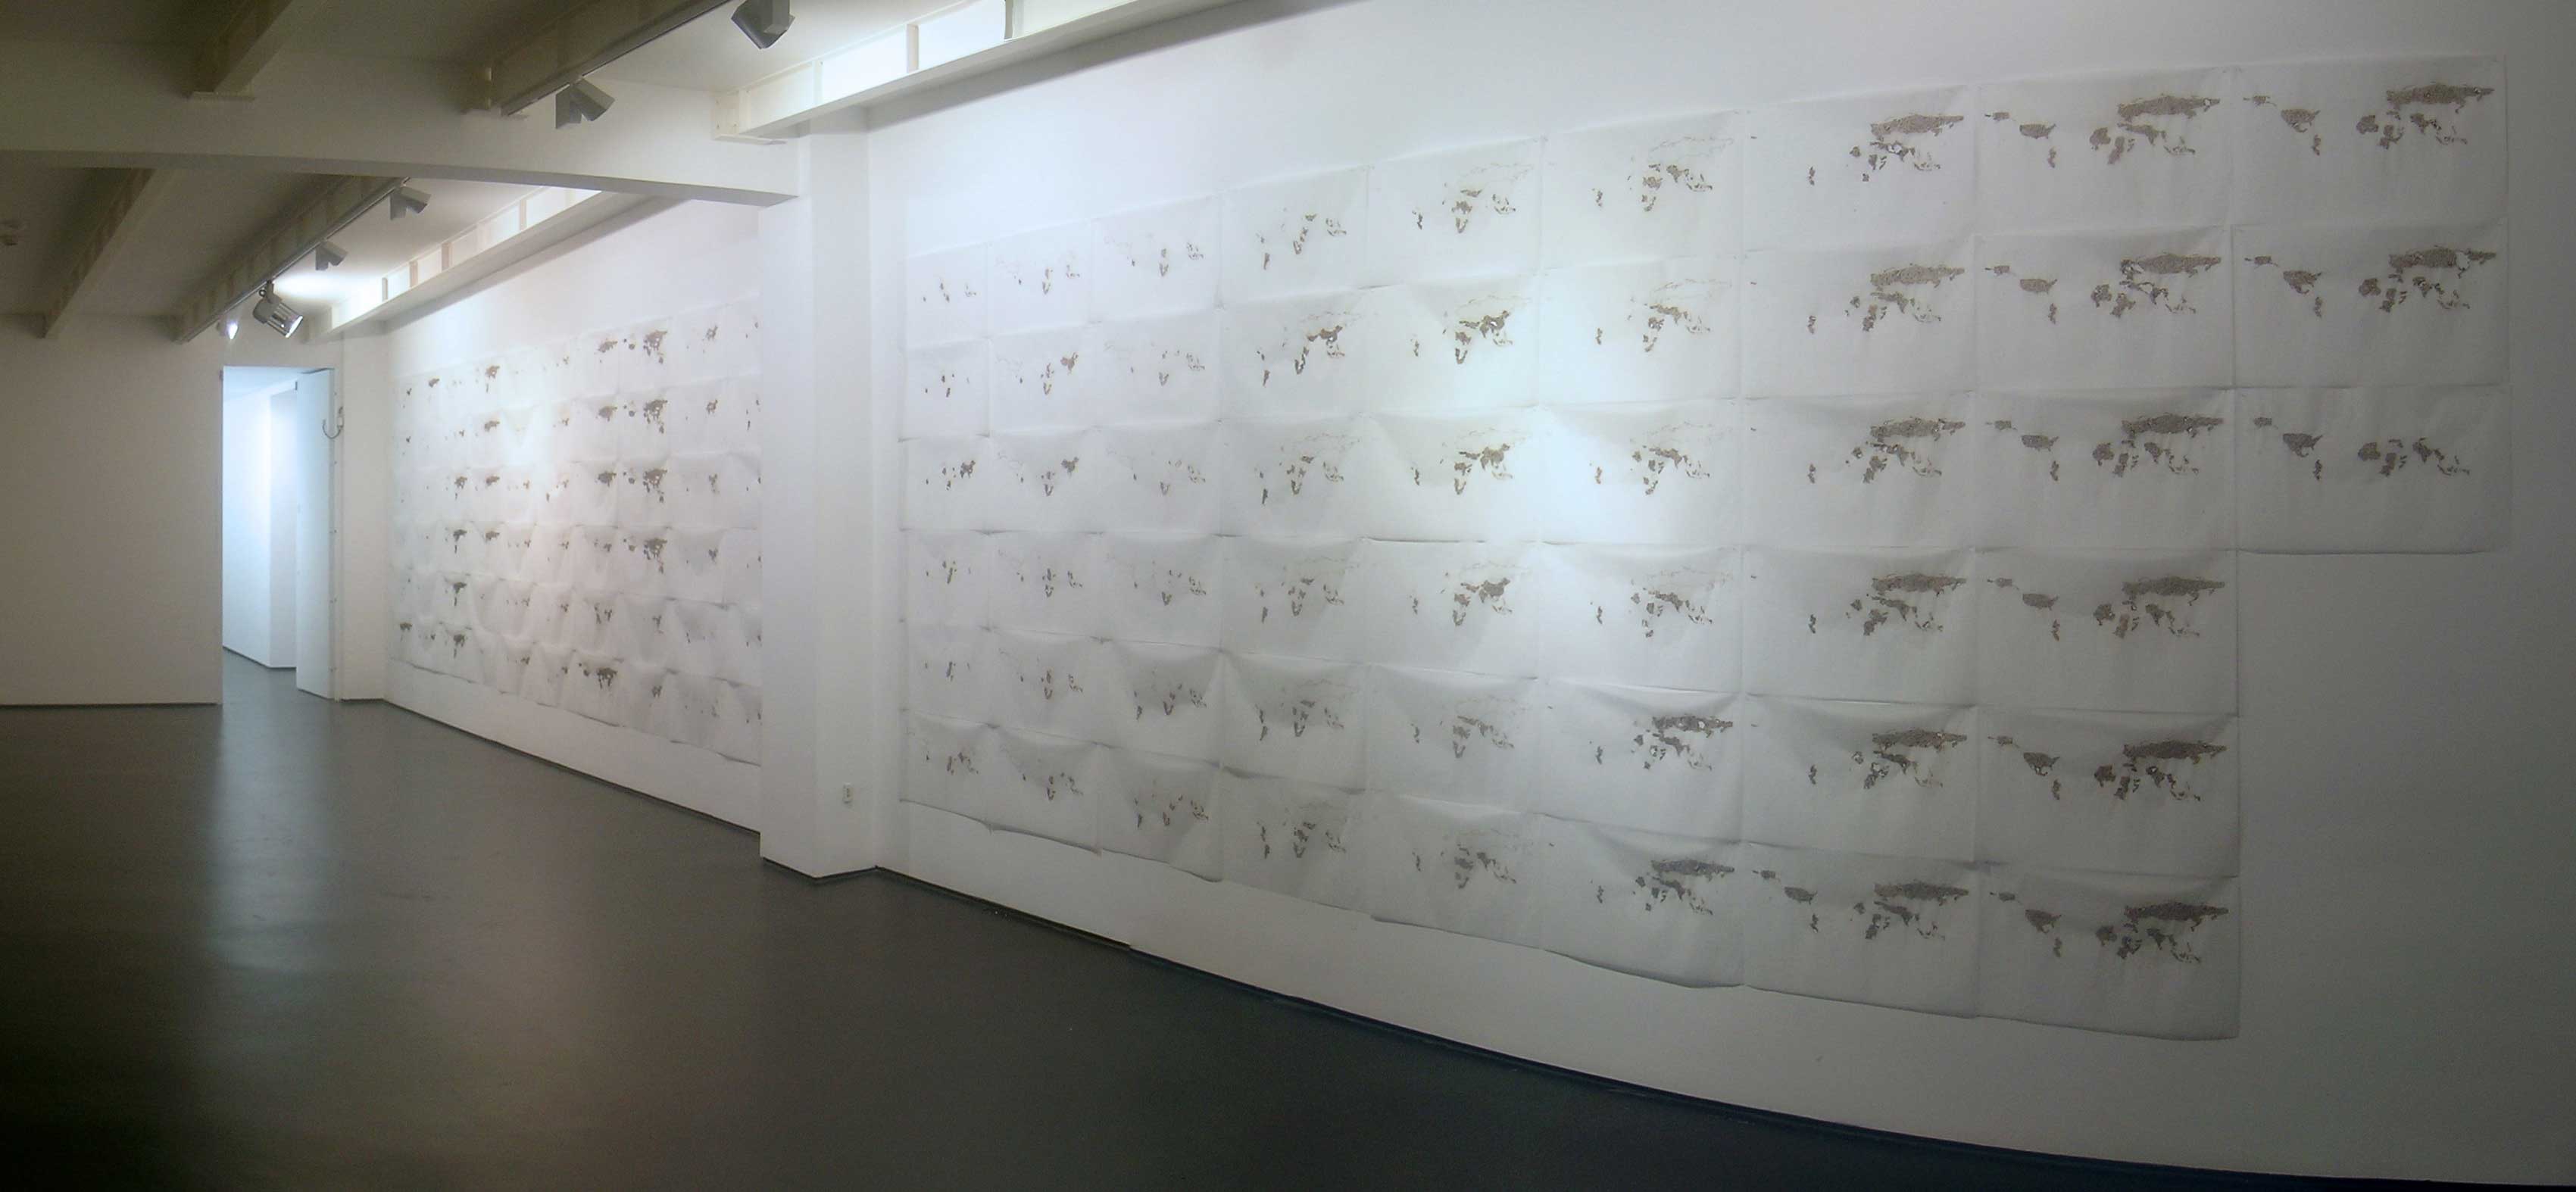 “111 Years” comprises of 111 drawings that map a century of war on our planet from 1900 to 2010. Methodology